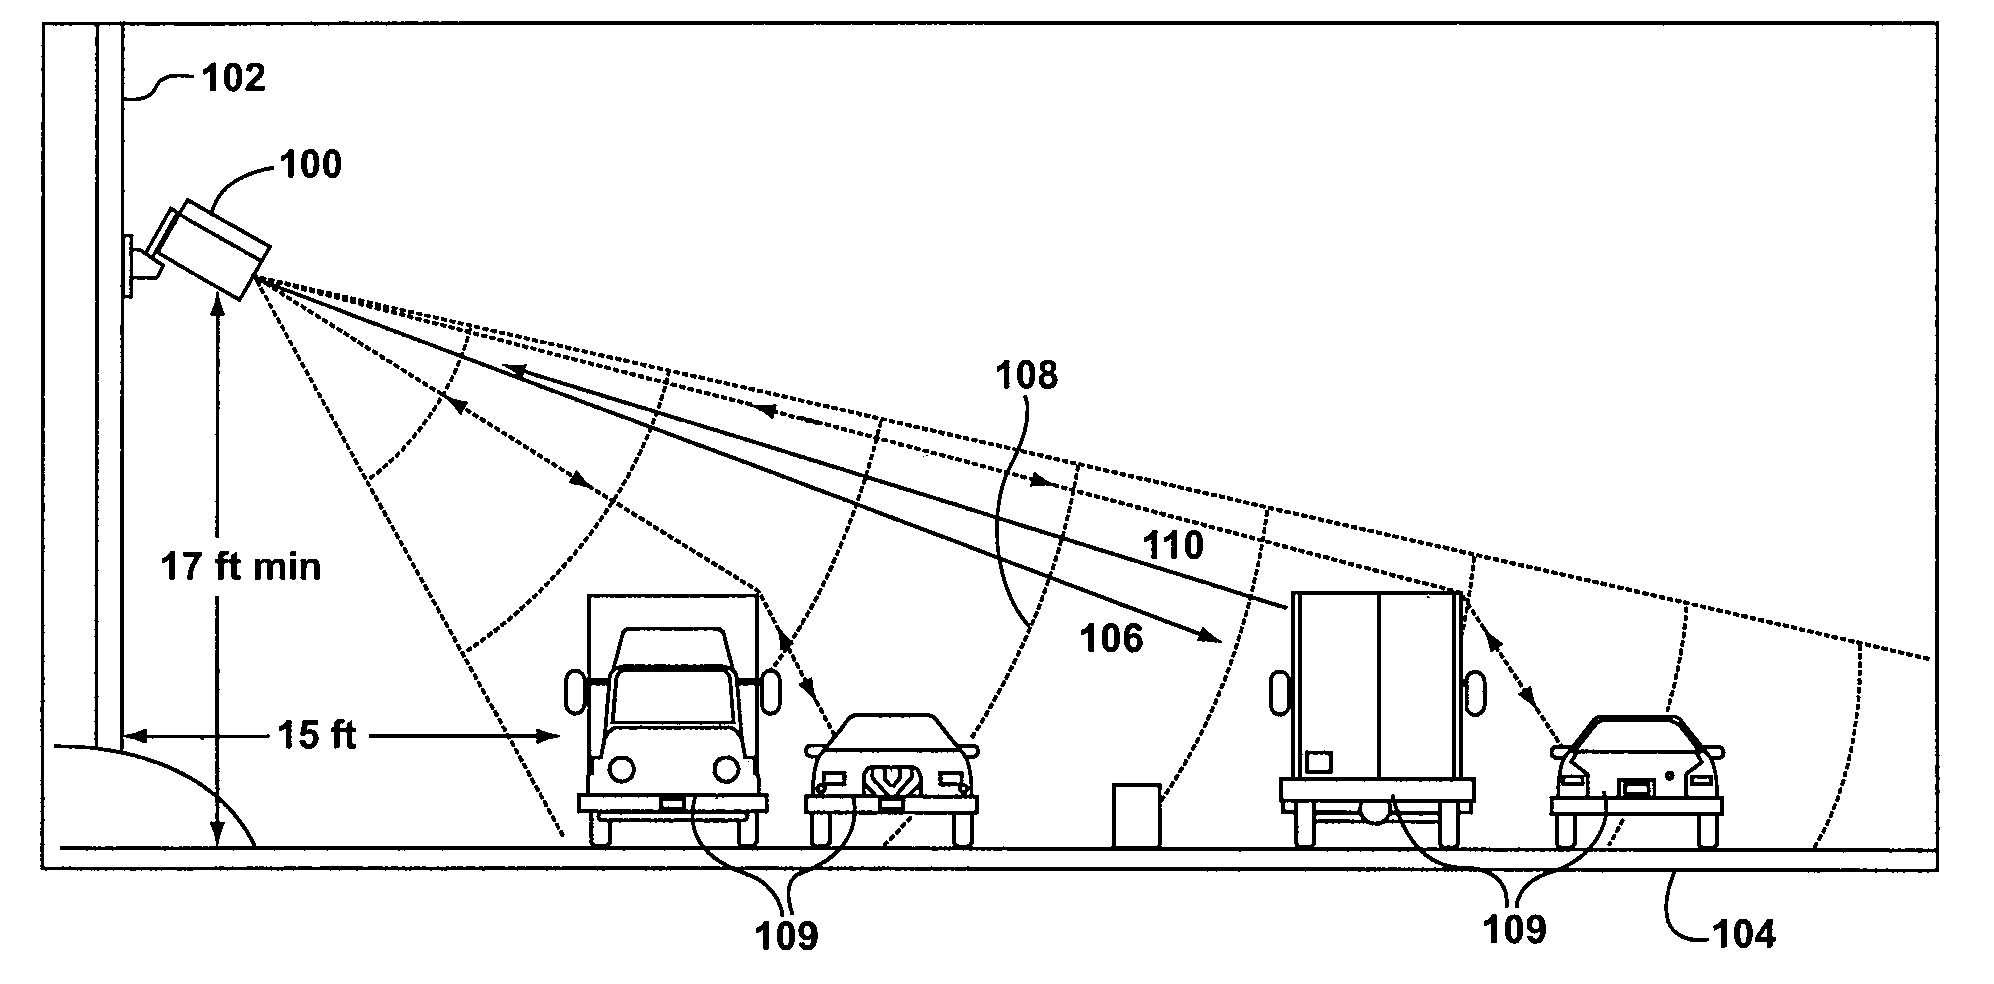 Traffic sensor incorporating a video camera and method of operating same